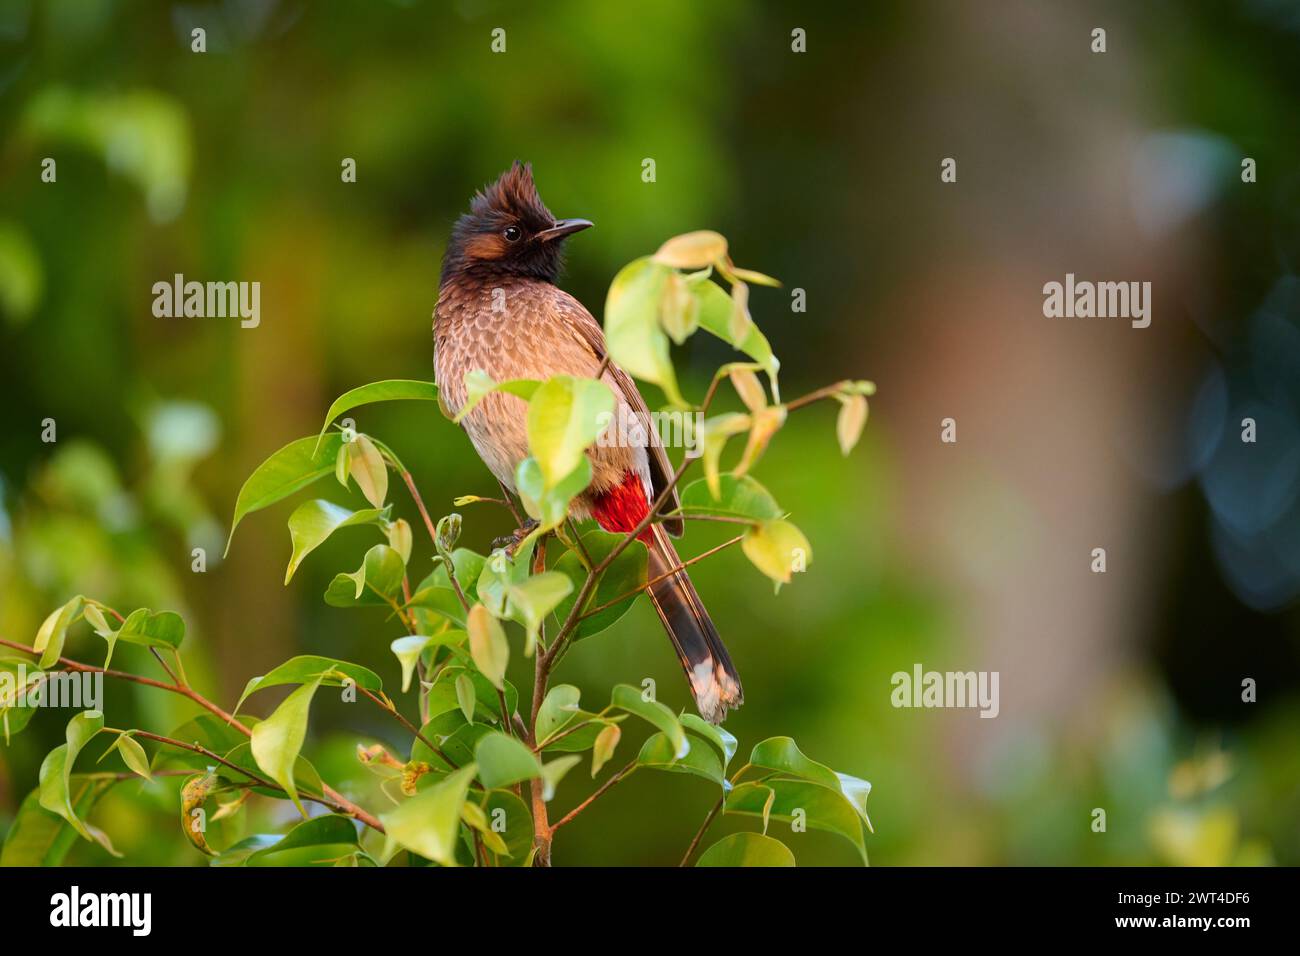 Red-vented bulbul perched in a tree Stock Photo